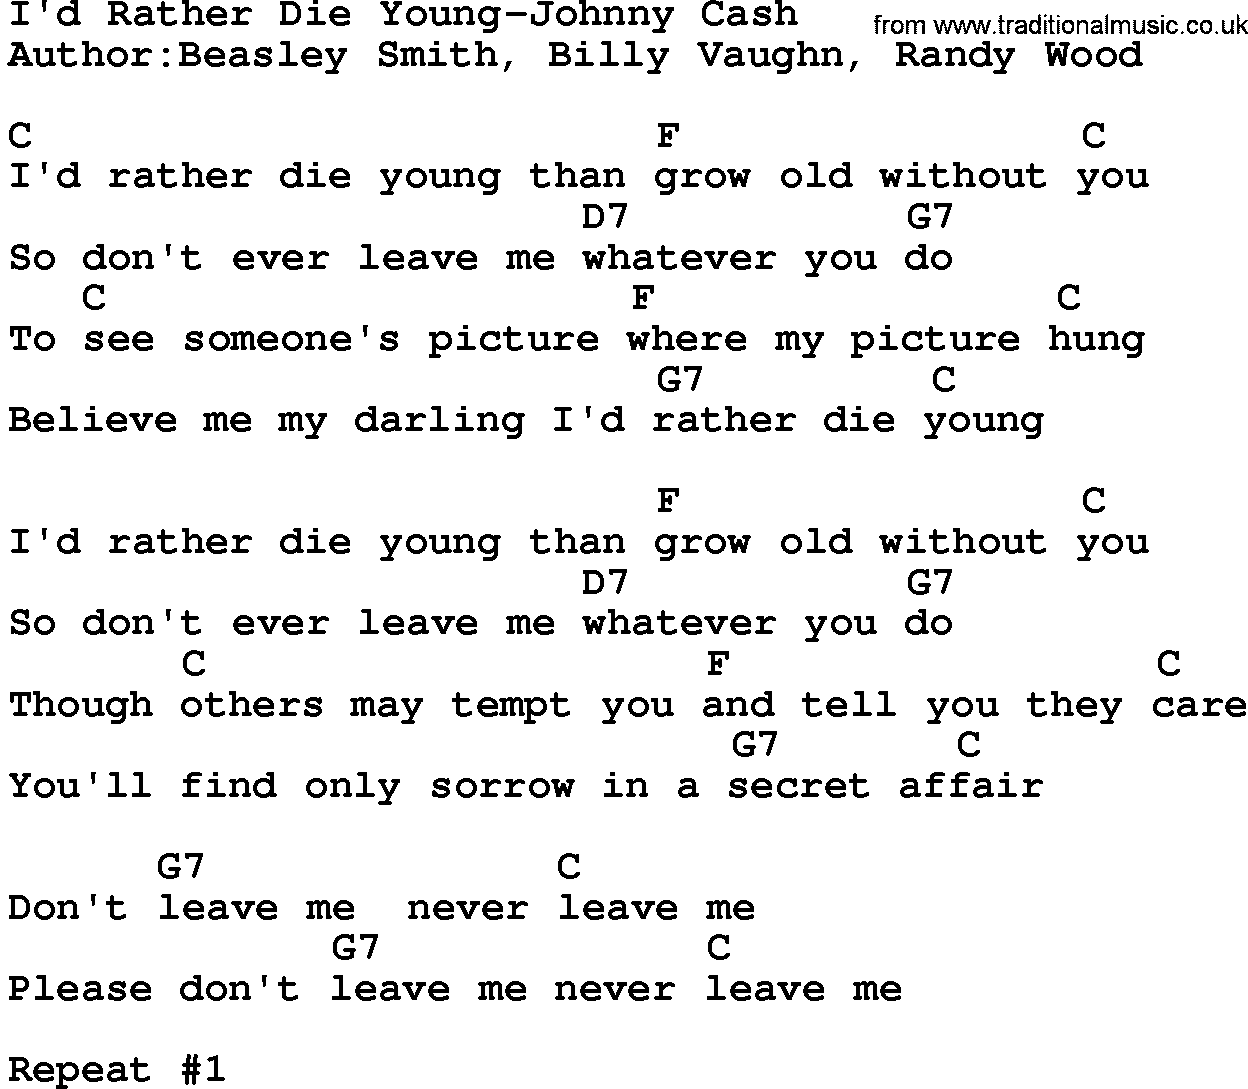 Country music song: I'd Rather Die Young-Johnny Cash lyrics and chords